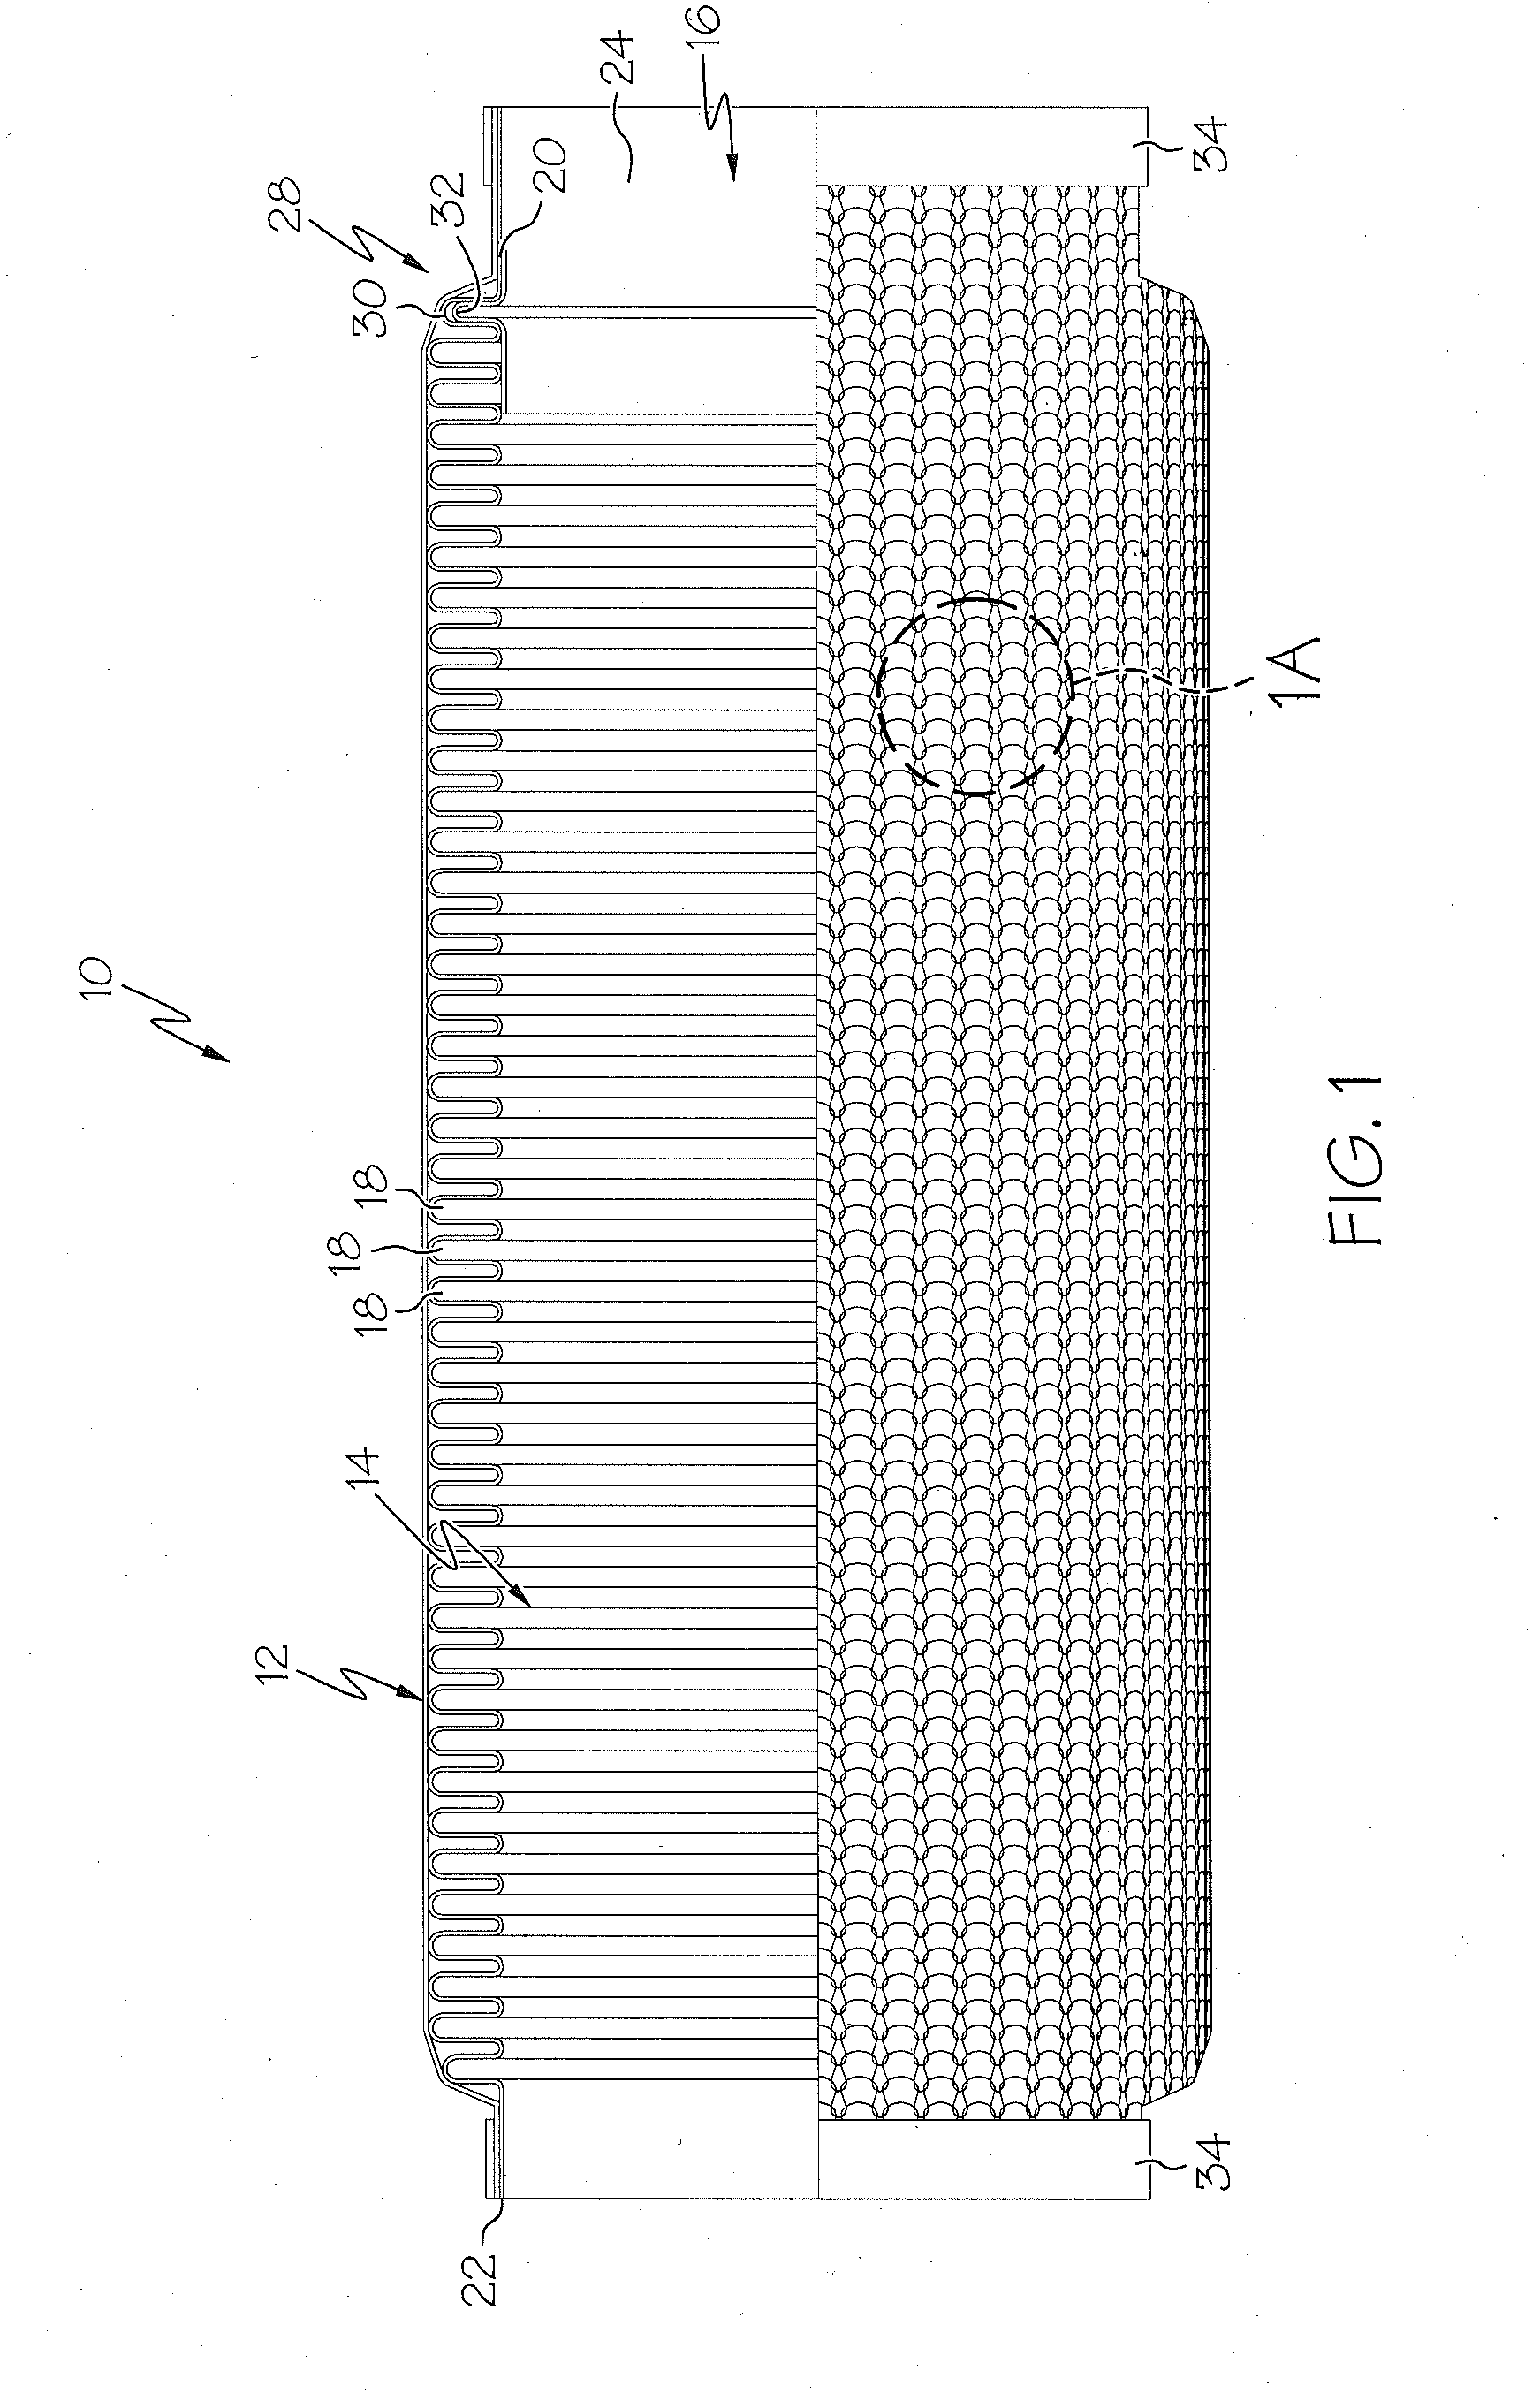 Frequency-controlled exhaust bellows assembly